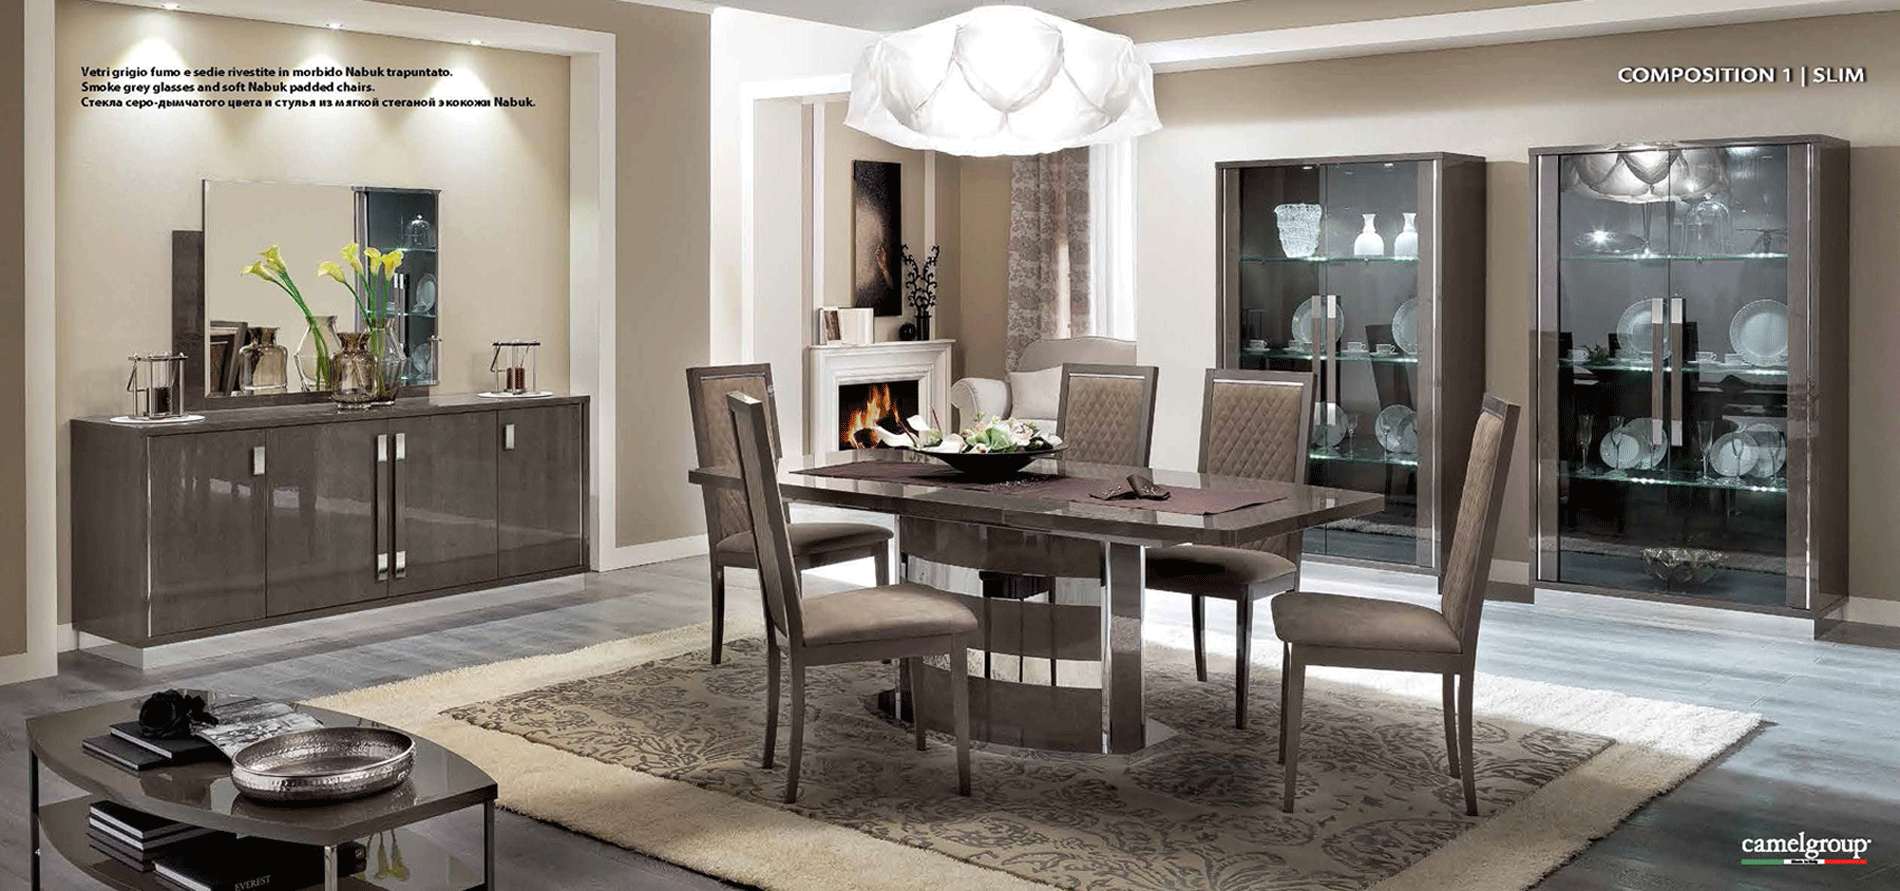 Dining Room Furniture Marble-Look Tables Platinum Dining Additional Items